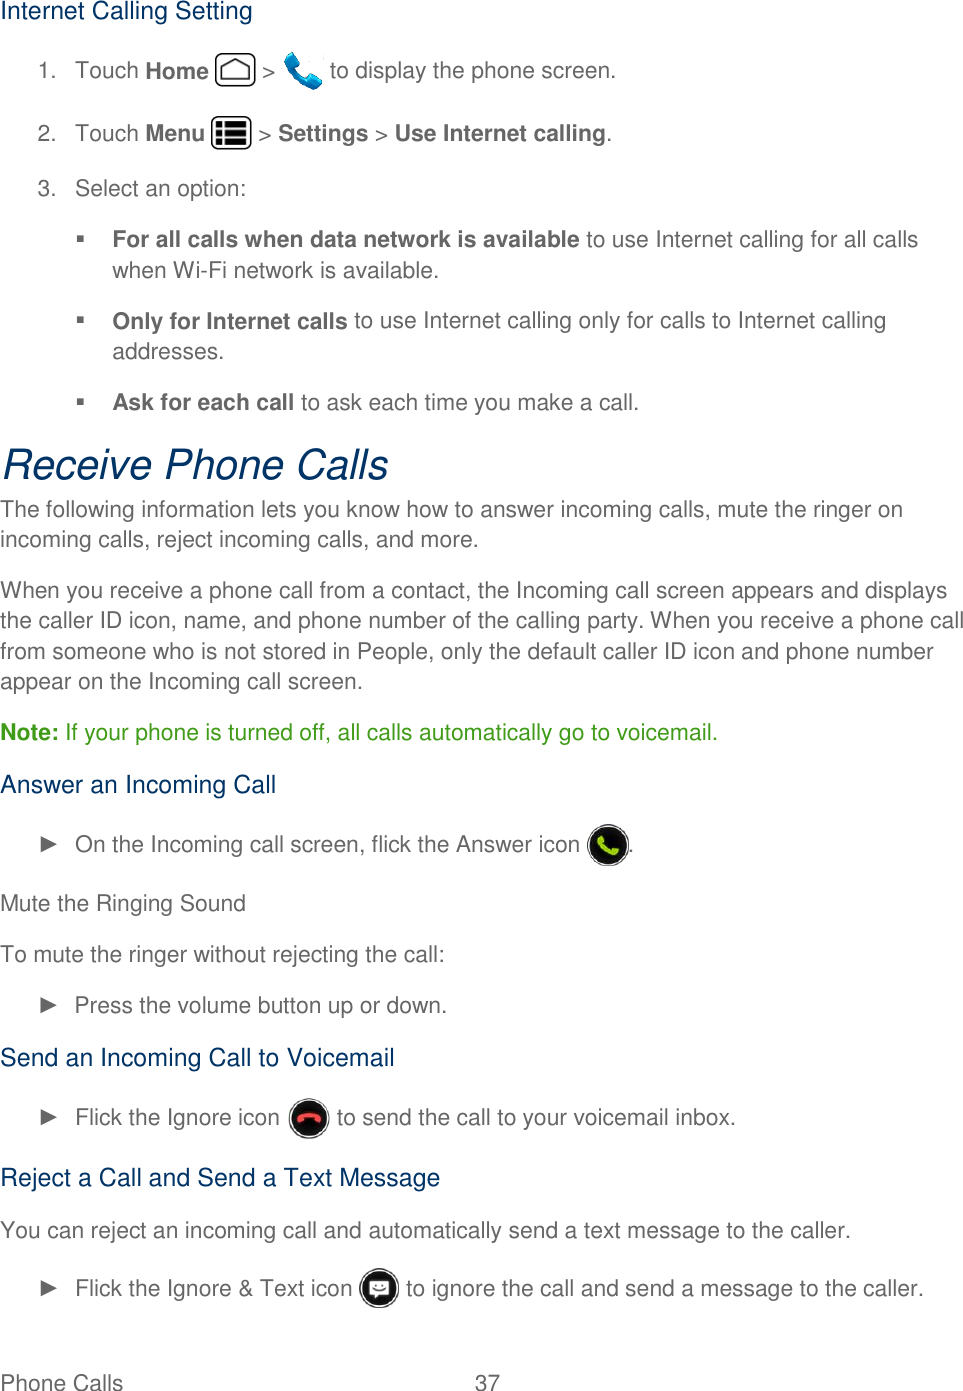 Phone Calls  37   Internet Calling Setting 1.  Touch Home   &gt;   to display the phone screen. 2.  Touch Menu   &gt; Settings &gt; Use Internet calling. 3.  Select an option:  For all calls when data network is available to use Internet calling for all calls when Wi-Fi network is available.  Only for Internet calls to use Internet calling only for calls to Internet calling addresses.  Ask for each call to ask each time you make a call. Receive Phone Calls The following information lets you know how to answer incoming calls, mute the ringer on incoming calls, reject incoming calls, and more. When you receive a phone call from a contact, the Incoming call screen appears and displays the caller ID icon, name, and phone number of the calling party. When you receive a phone call from someone who is not stored in People, only the default caller ID icon and phone number appear on the Incoming call screen. Note: If your phone is turned off, all calls automatically go to voicemail. Answer an Incoming Call ►  On the Incoming call screen, flick the Answer icon  . Mute the Ringing Sound To mute the ringer without rejecting the call: ►  Press the volume button up or down. Send an Incoming Call to Voicemail ►  Flick the Ignore icon   to send the call to your voicemail inbox. Reject a Call and Send a Text Message You can reject an incoming call and automatically send a text message to the caller. ►  Flick the Ignore &amp; Text icon   to ignore the call and send a message to the caller. 